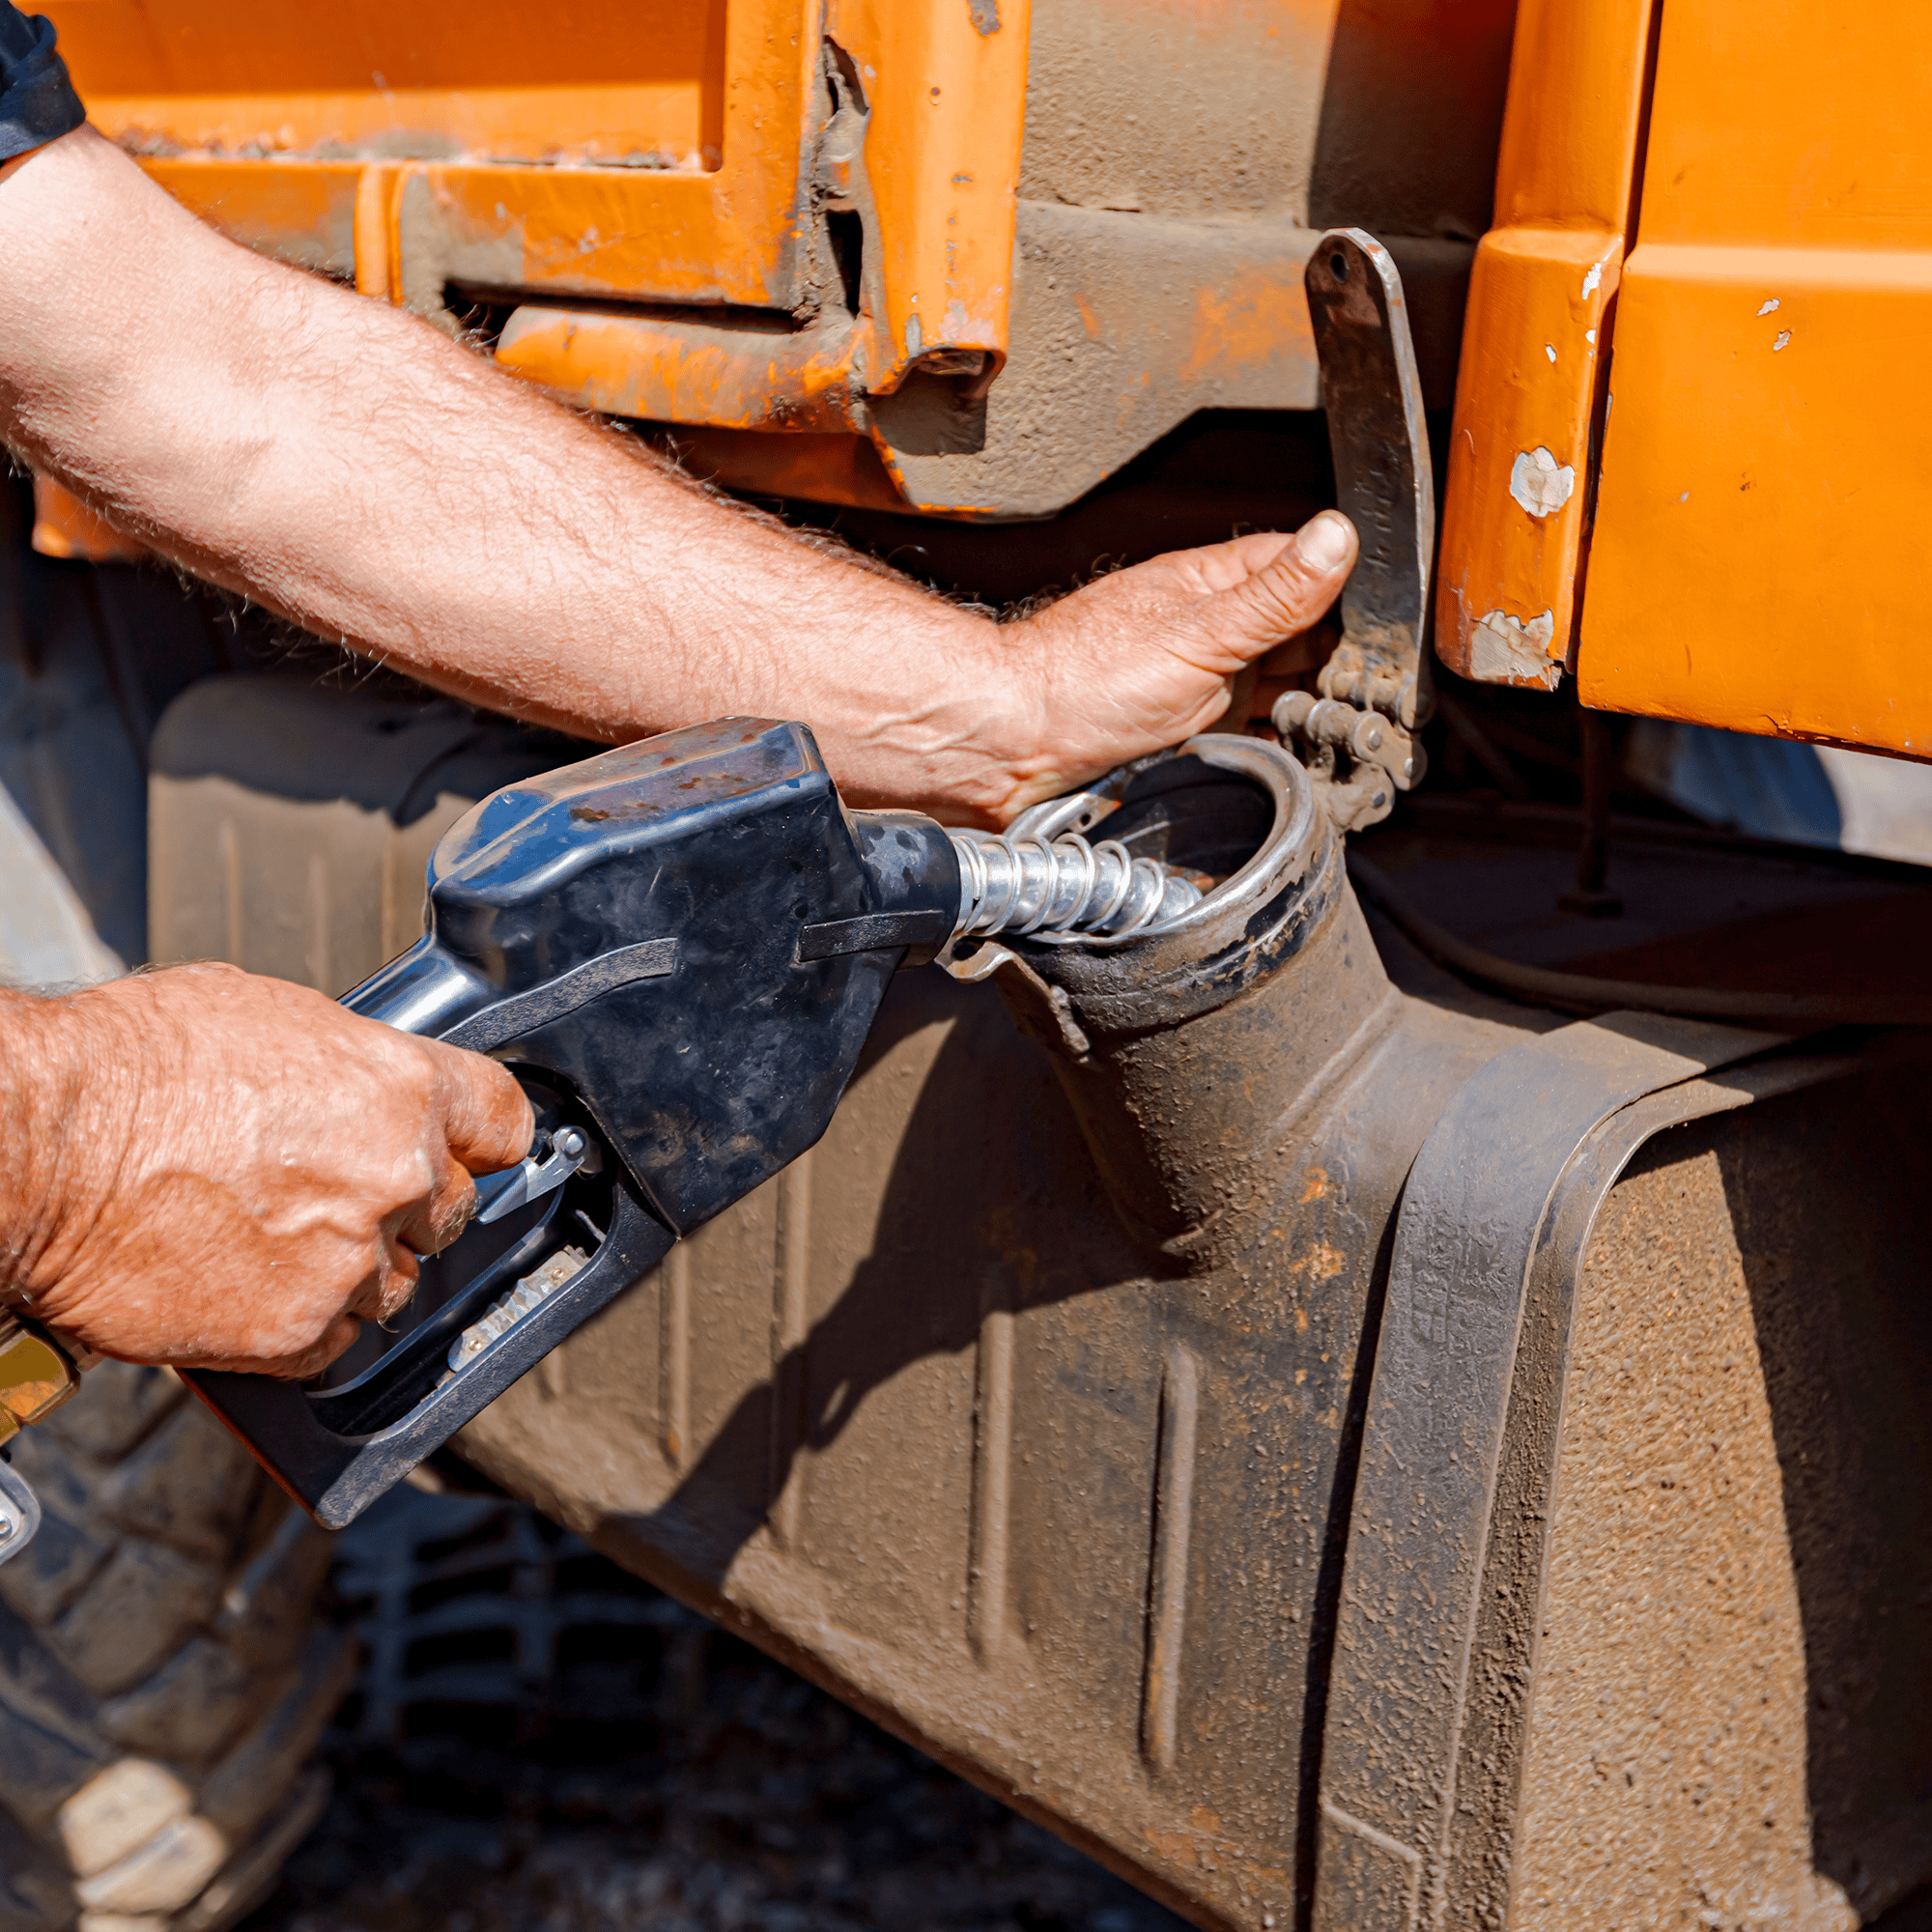 Close up of a pair of hands and a gas pump pumping fuel into a heavy equipment